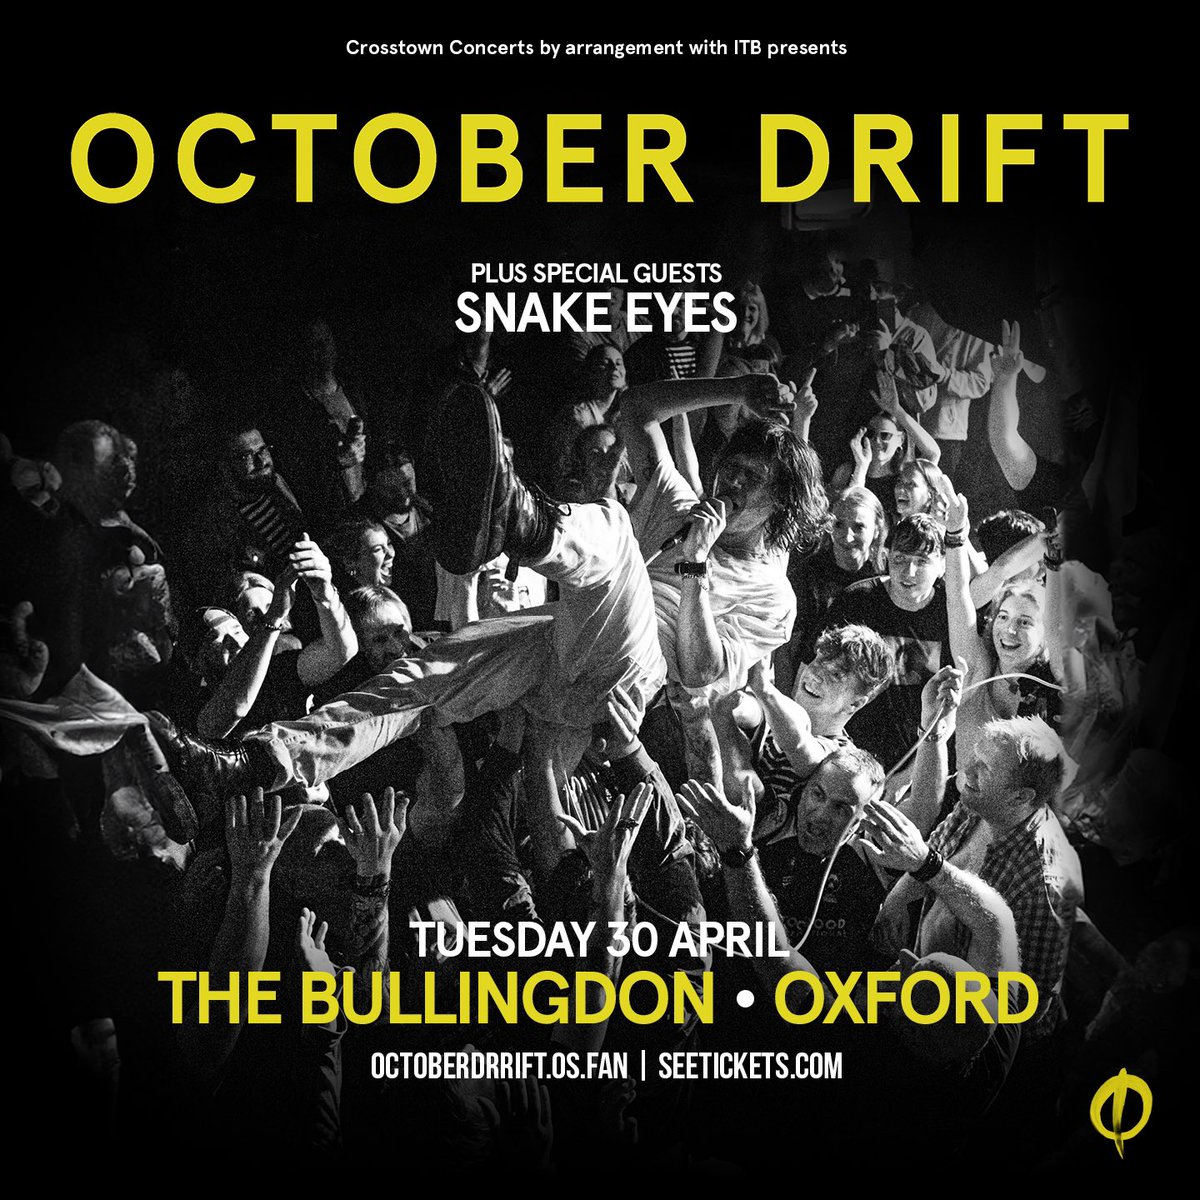 Special guests @wehavesnakeeyes join @octoberdrift at @TheBullingdon on Tuesday 30th April. Tickets here: crosstownconcerts.seetickets.com/event/october-…